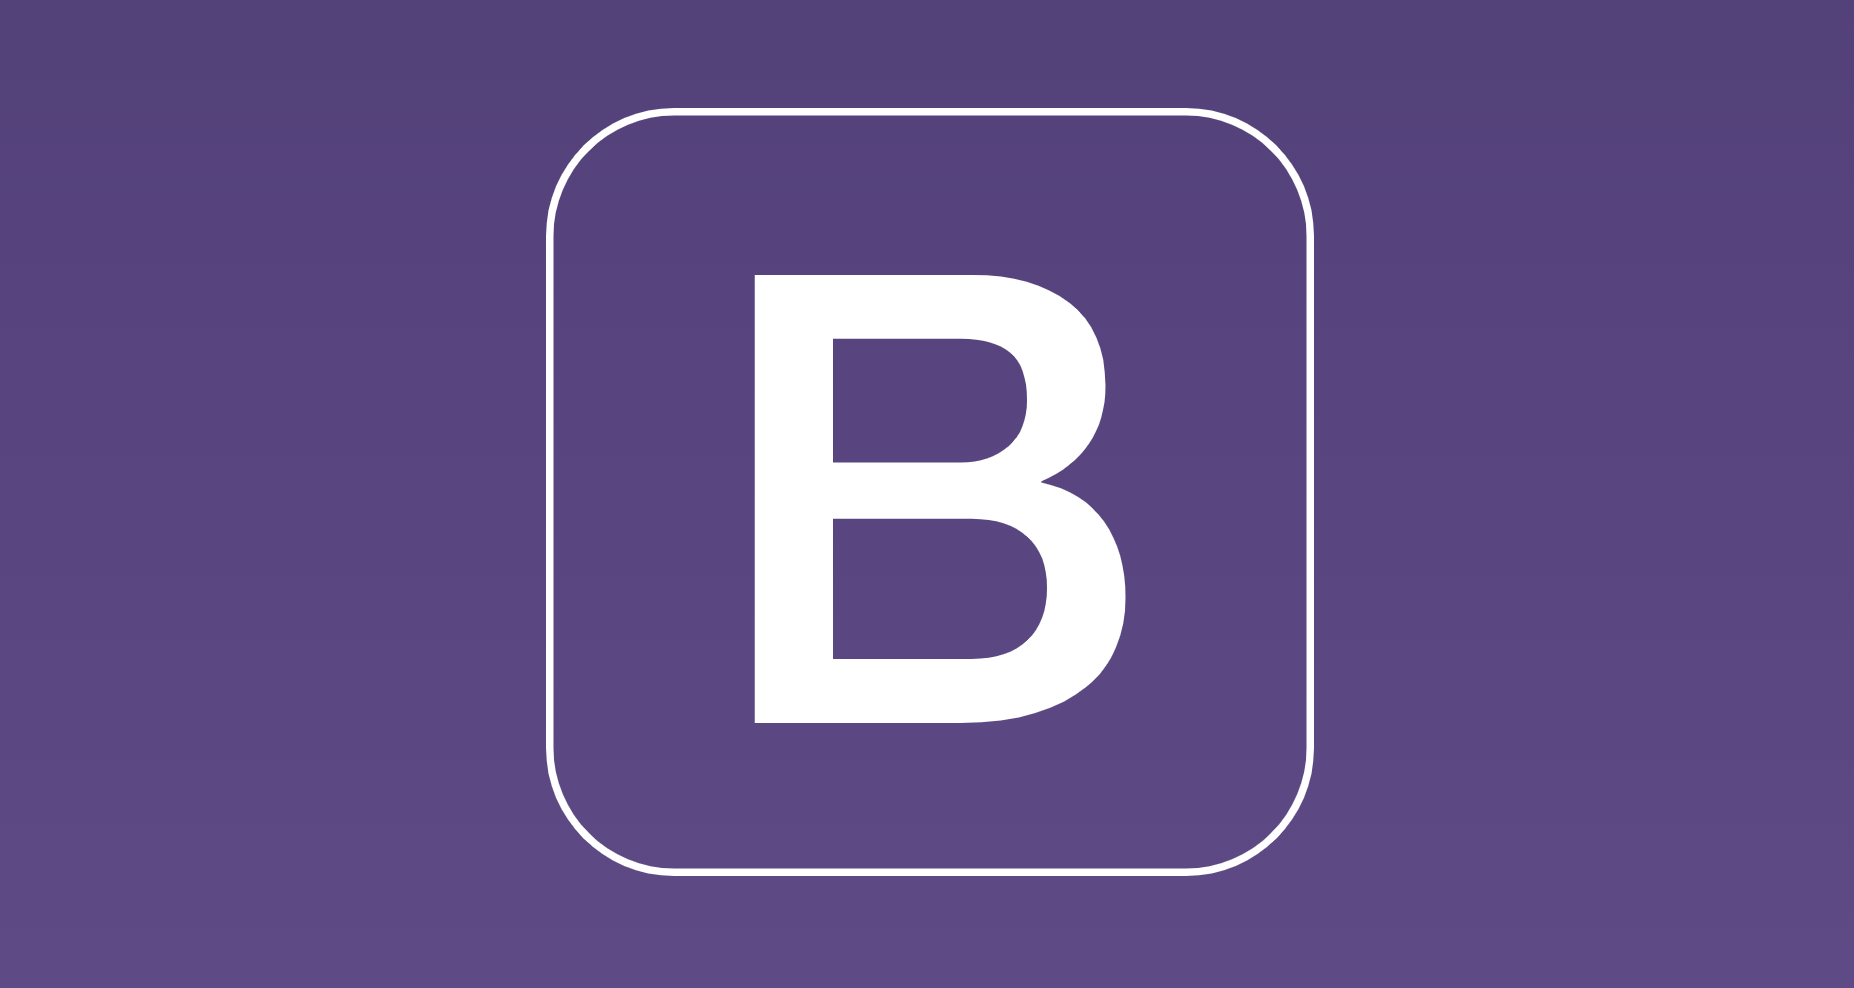 Bootstrap d. Картинка Bootstrap. Иконка Bootstrap. Bootstrap (фреймворк). Bootstrap 5 logo.